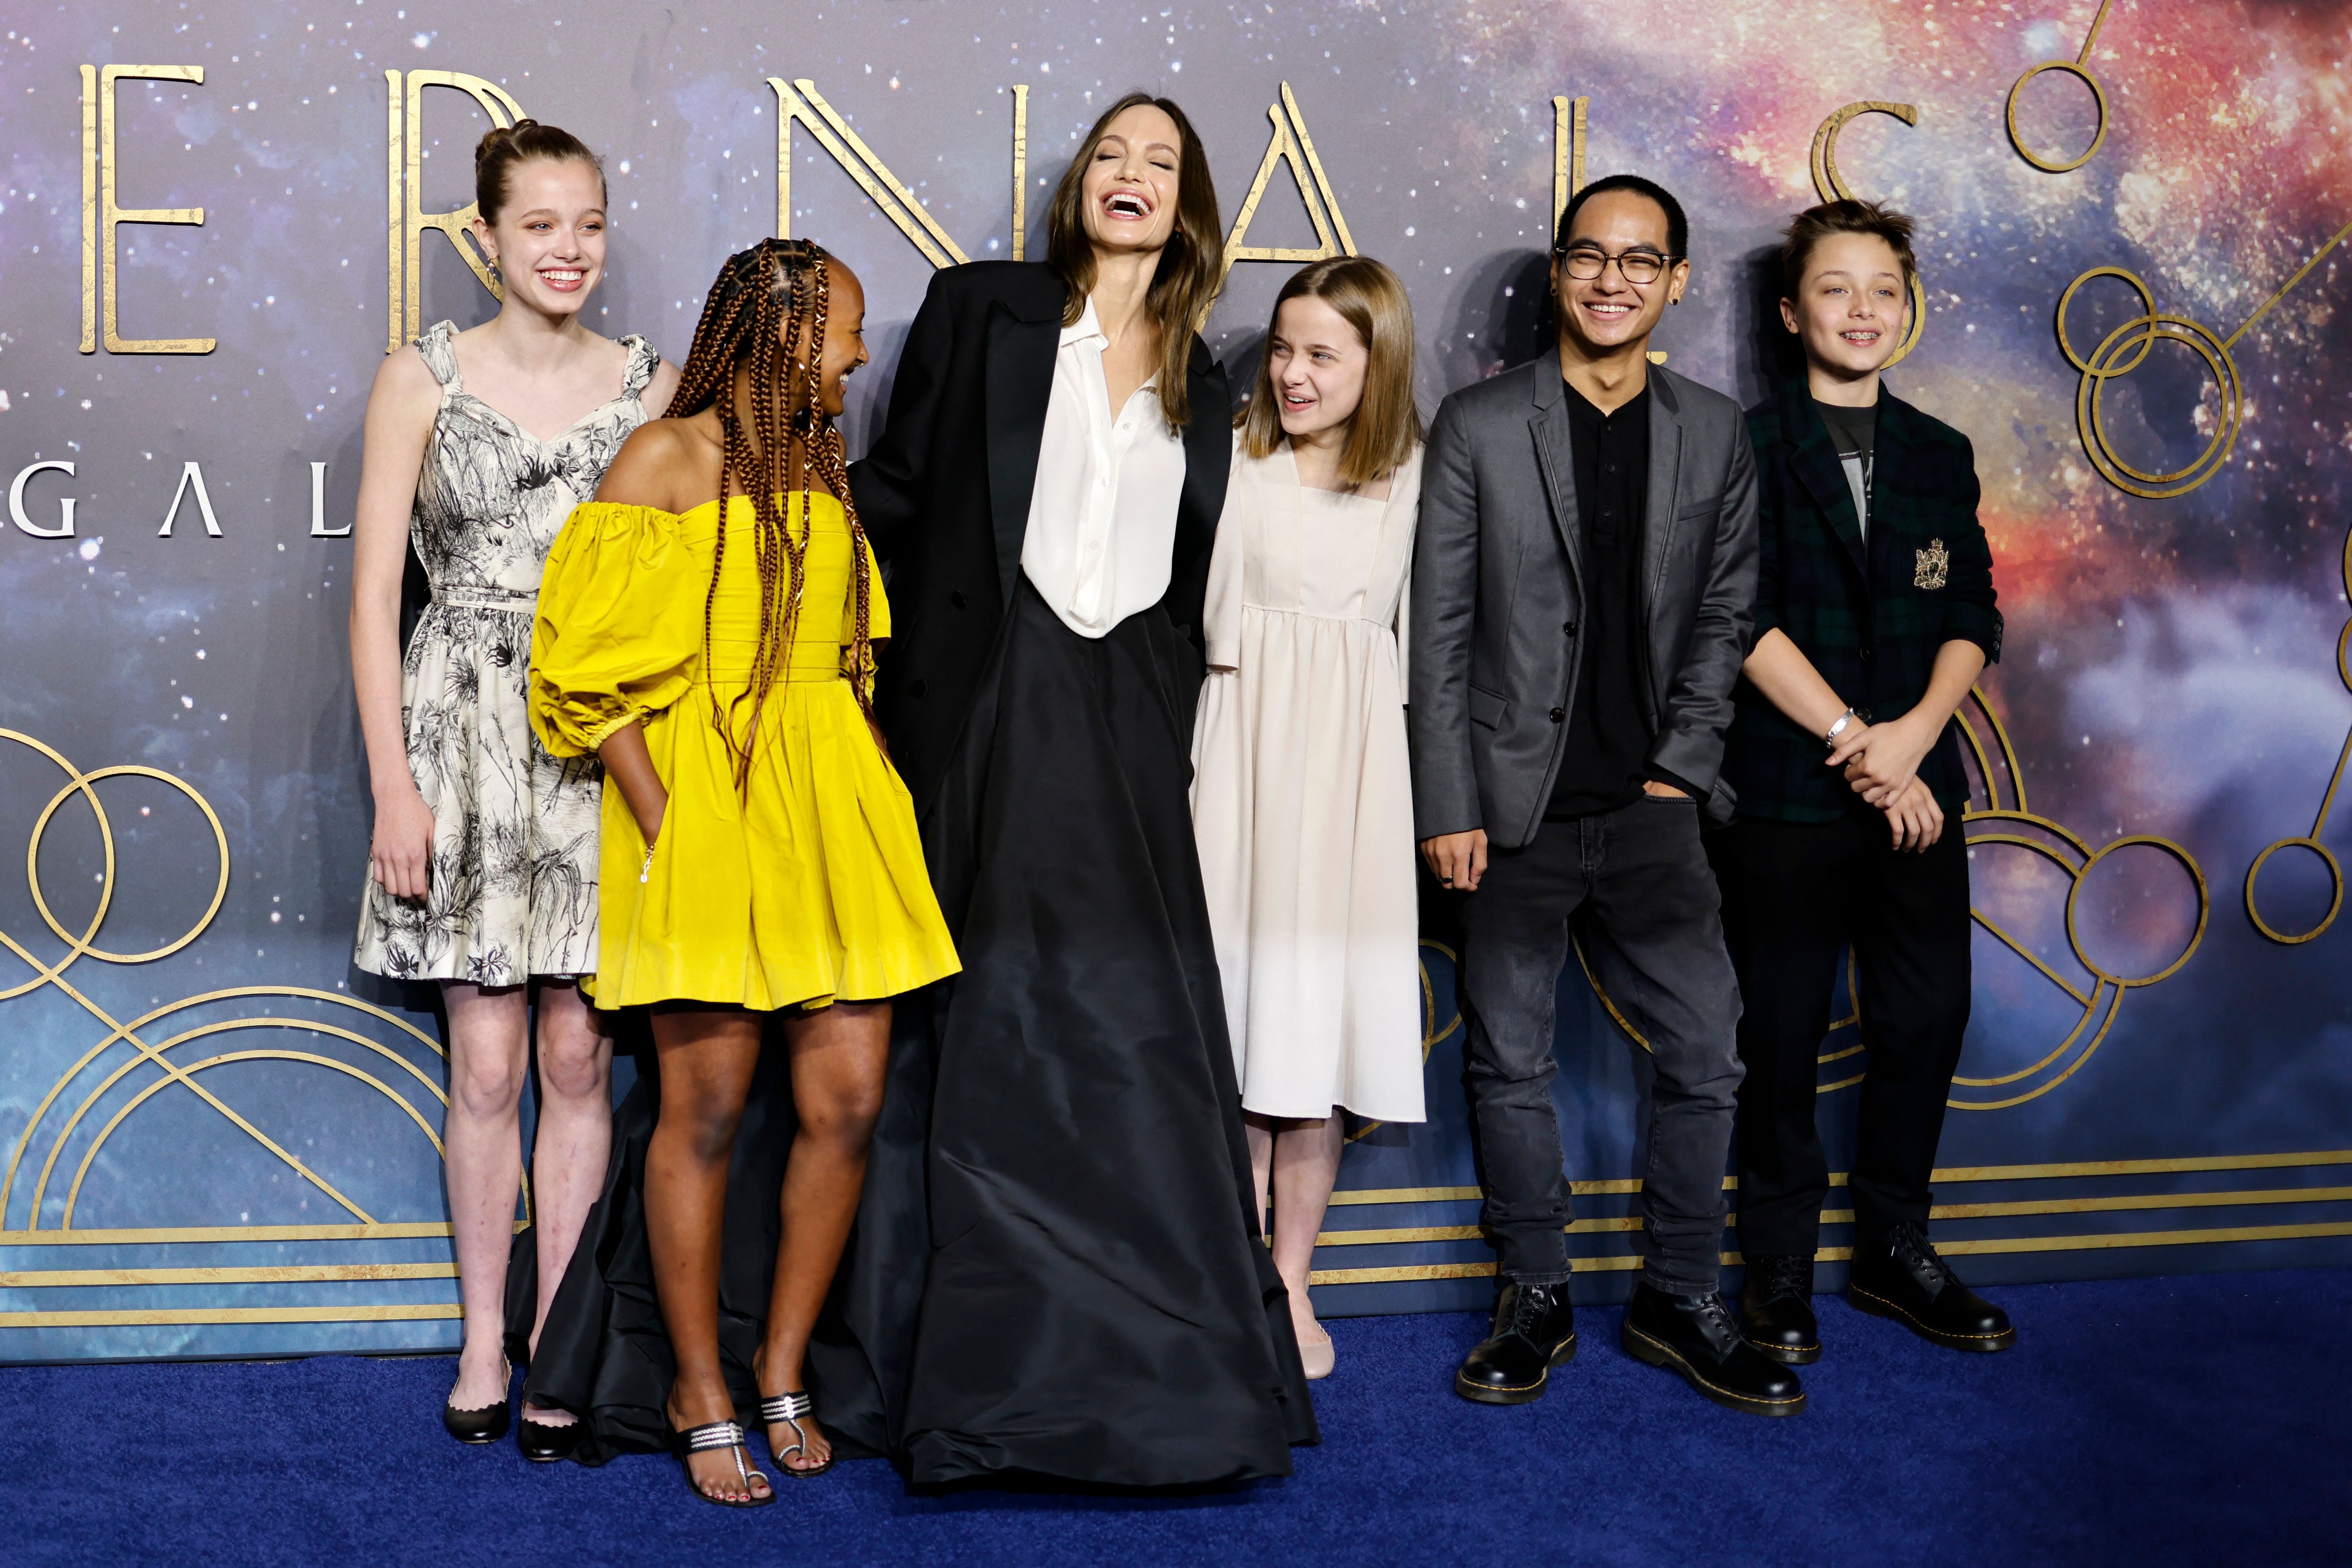 Shiloh, Zahara, Angeline Jolie, Vivienne, Maddox, and Knox Jolie-Pitt on the blue carpet on arrival to attend the UK Gala Screening of the film 'Eternals', at the BFI IMAX in London on October 27, 2021. | Source: Getty Images